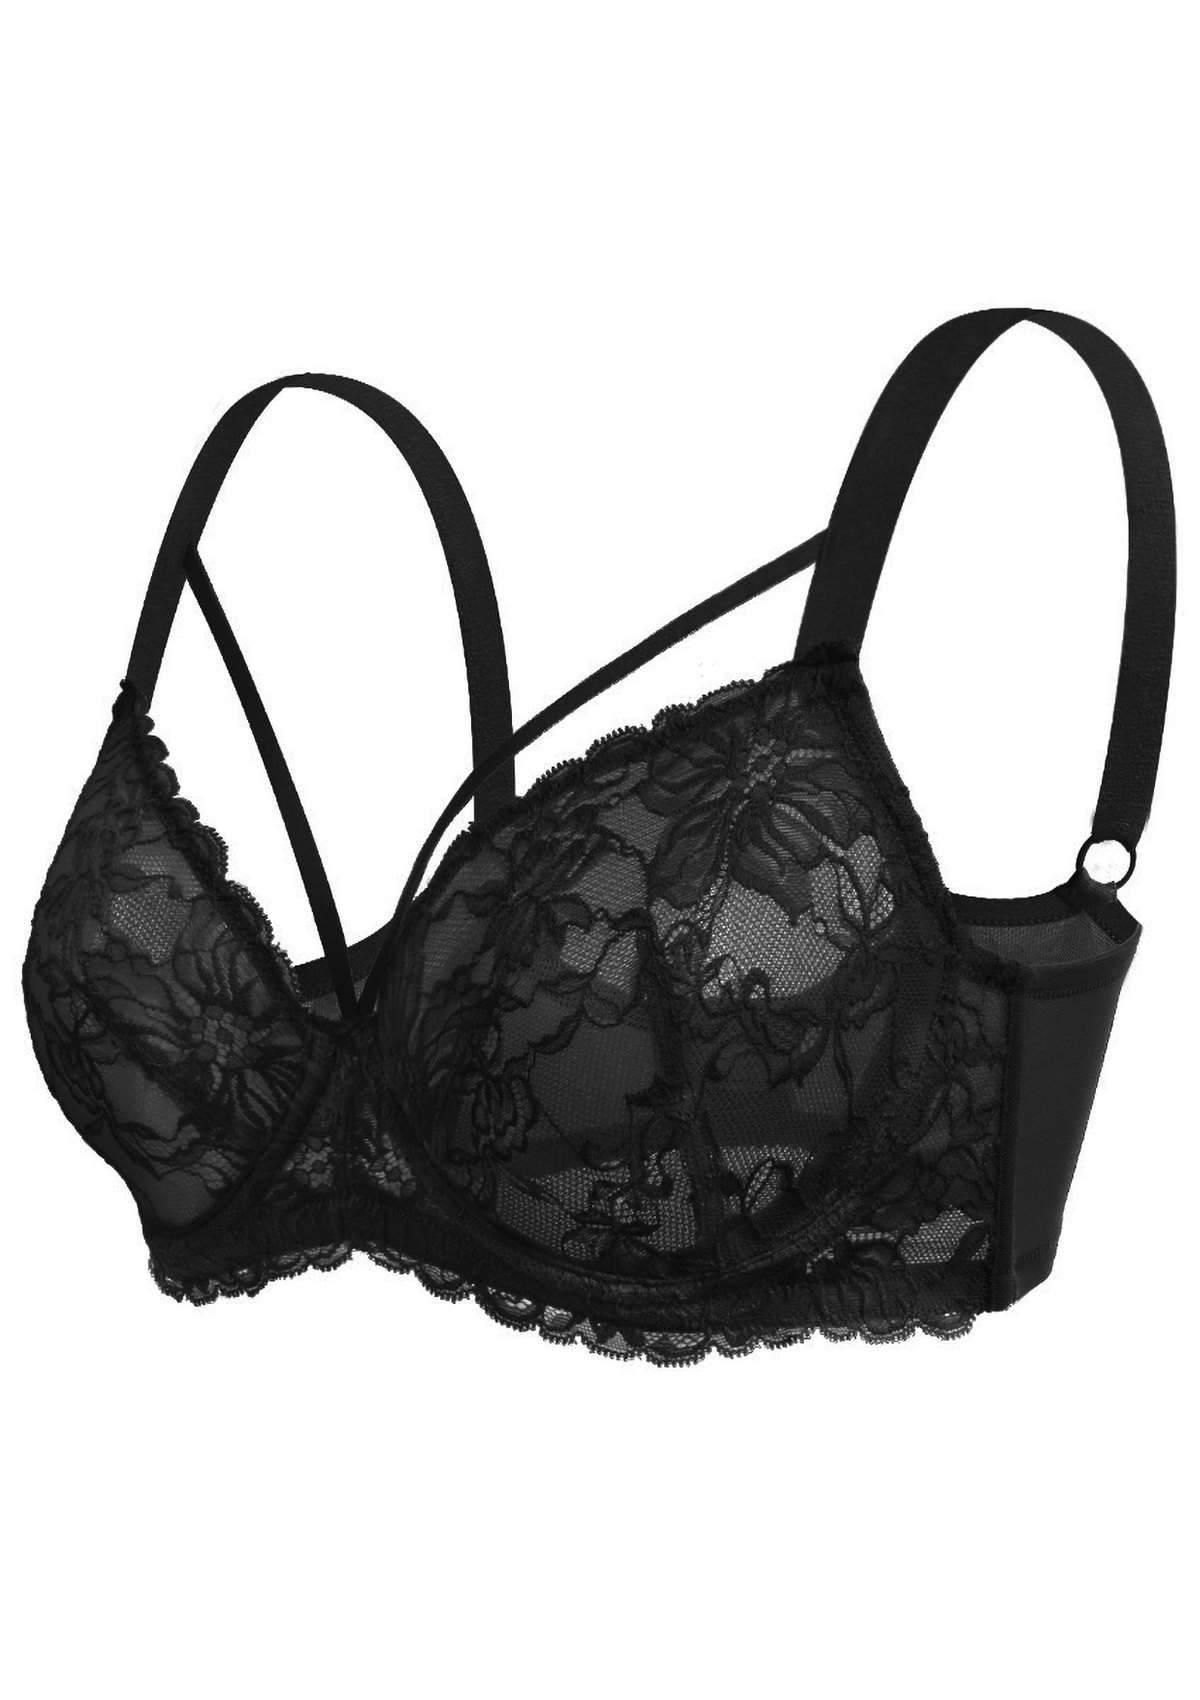 HSIA Pretty In Petals Bra - Plus Size Lingerie For Comfrot And Support - Black / 44 / C